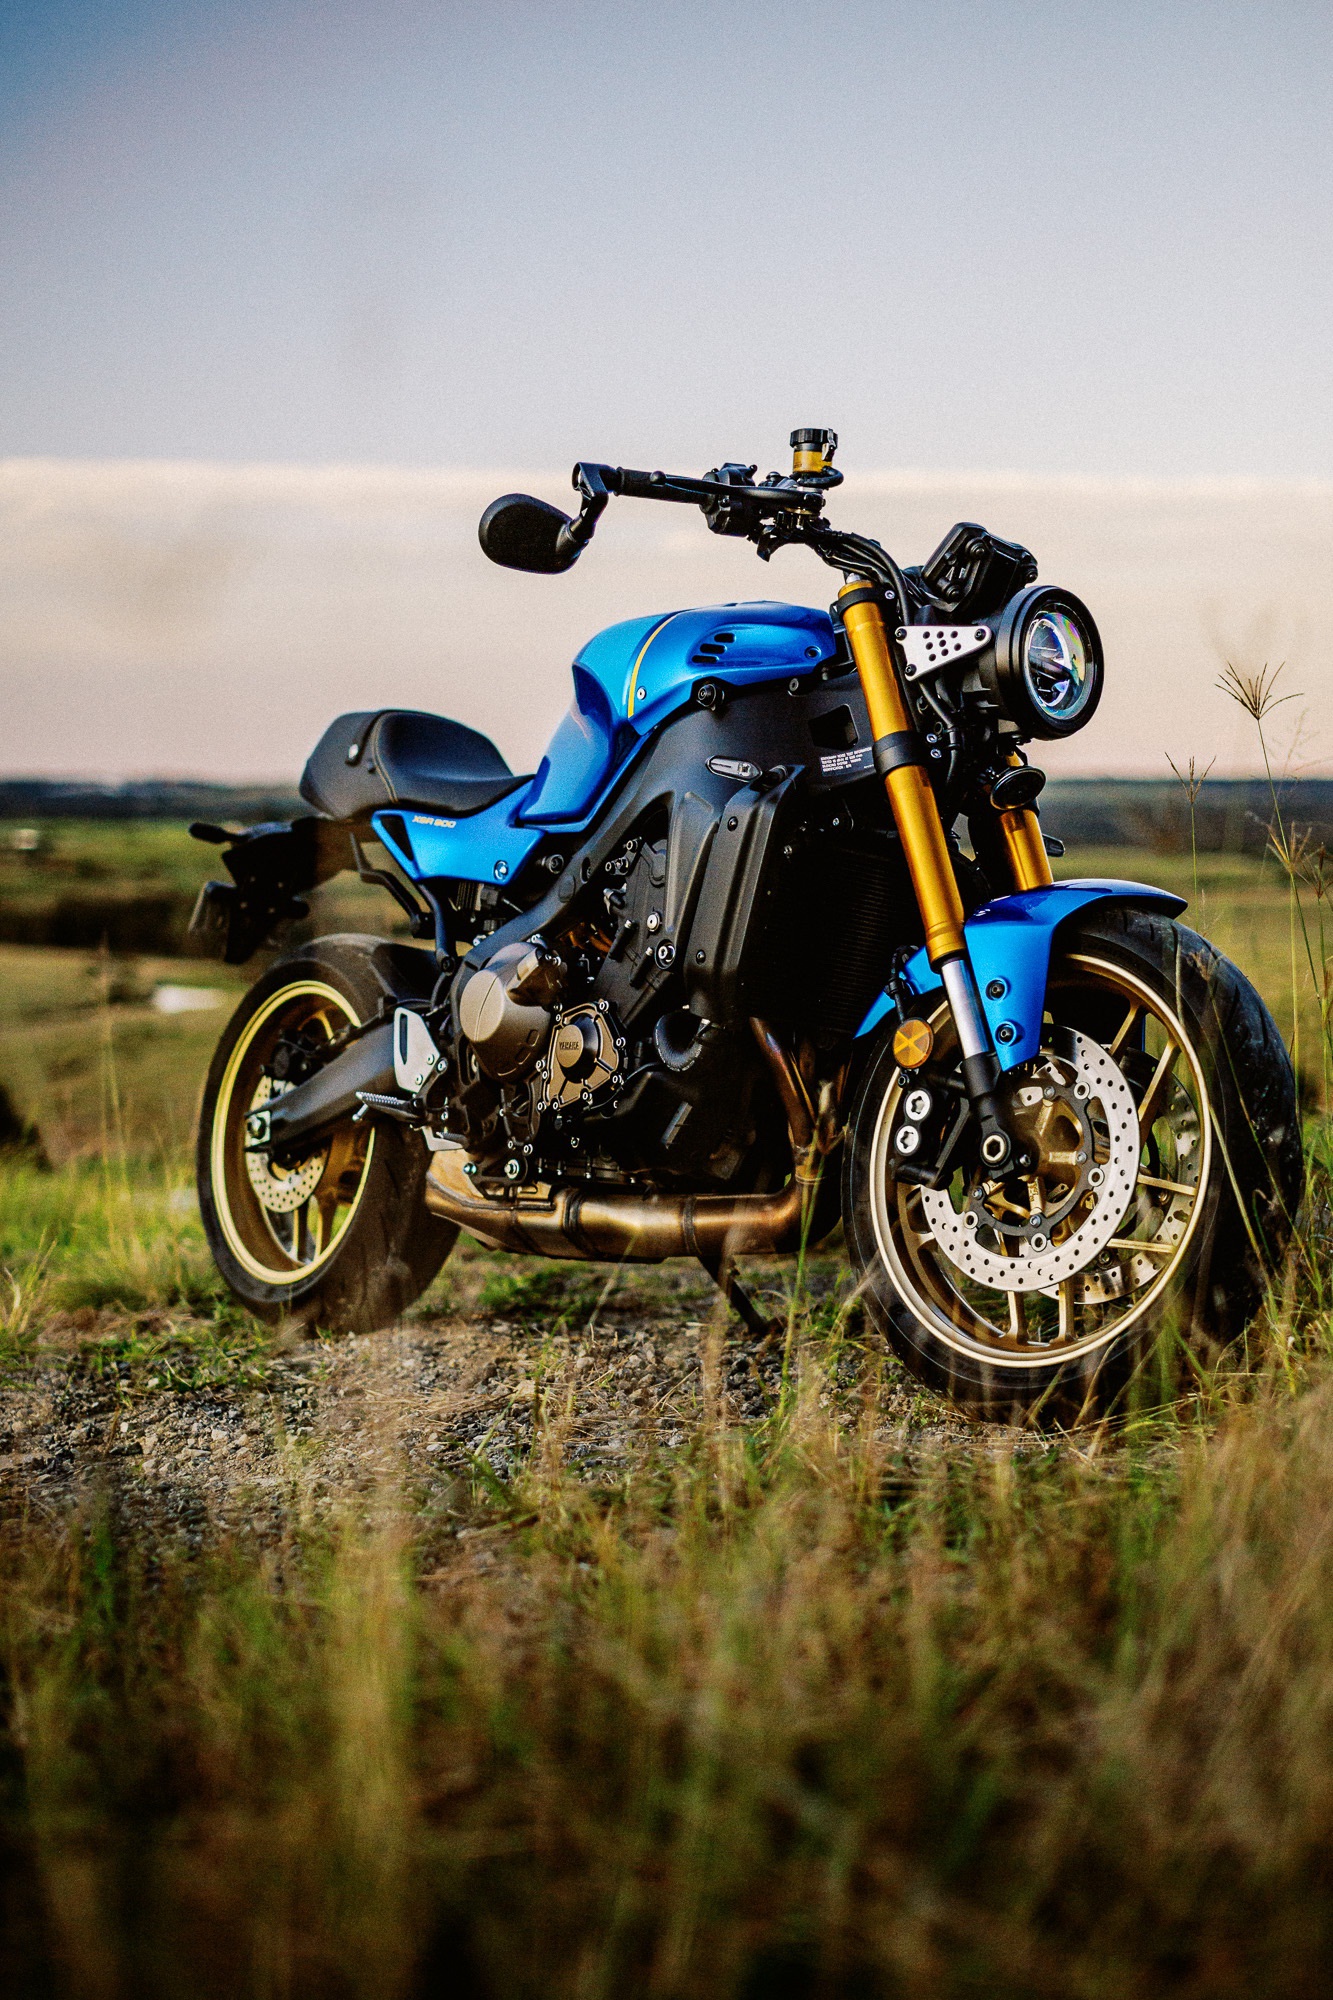 The 2022 Yamaha XSR900 motorcycle at dusk in the outskirts of Sydney, Australia.